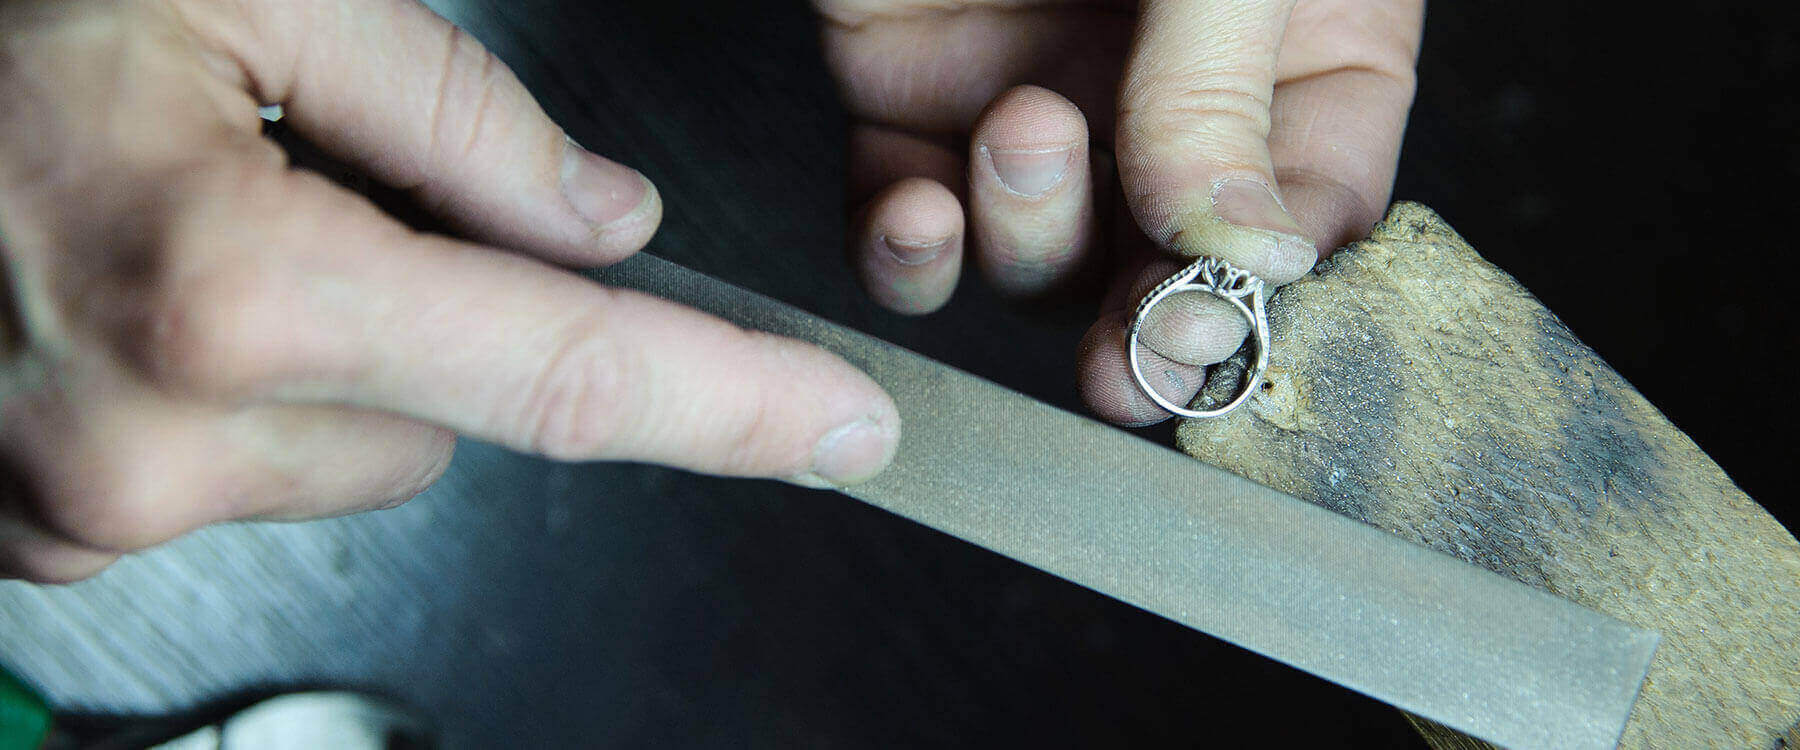 A ring being filed at a work bench